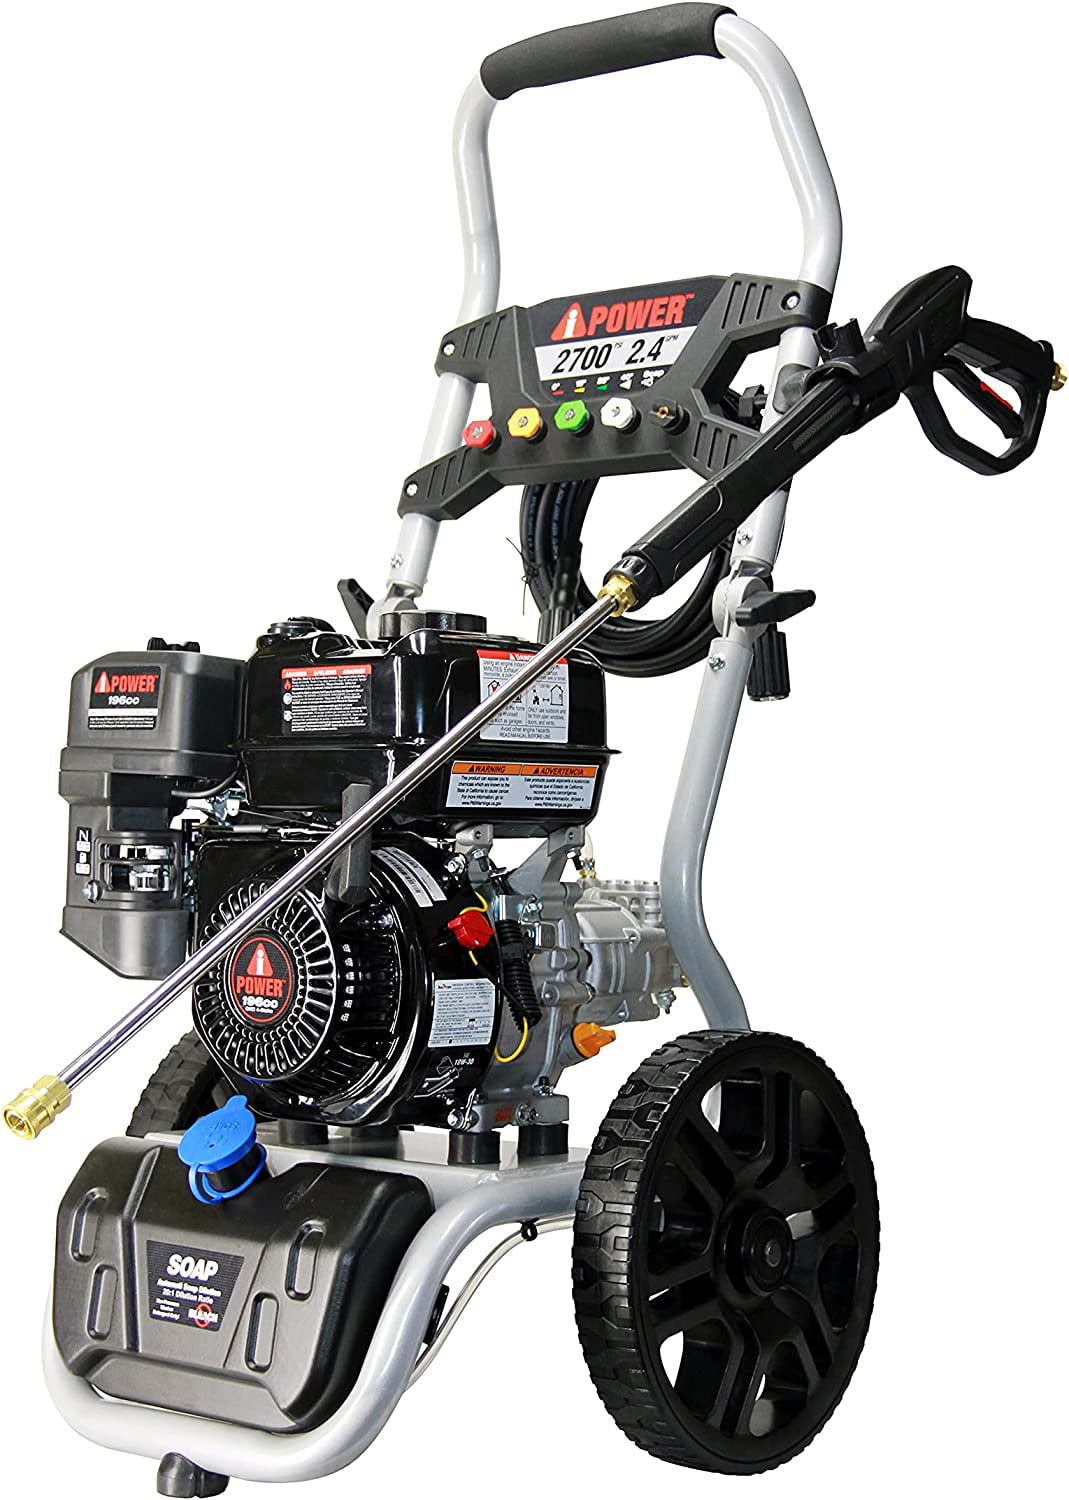 A-IPOWER Power Pressure Washer 2700 PSI Pressure Washer 2.4 GPM PWF2700SH - 1